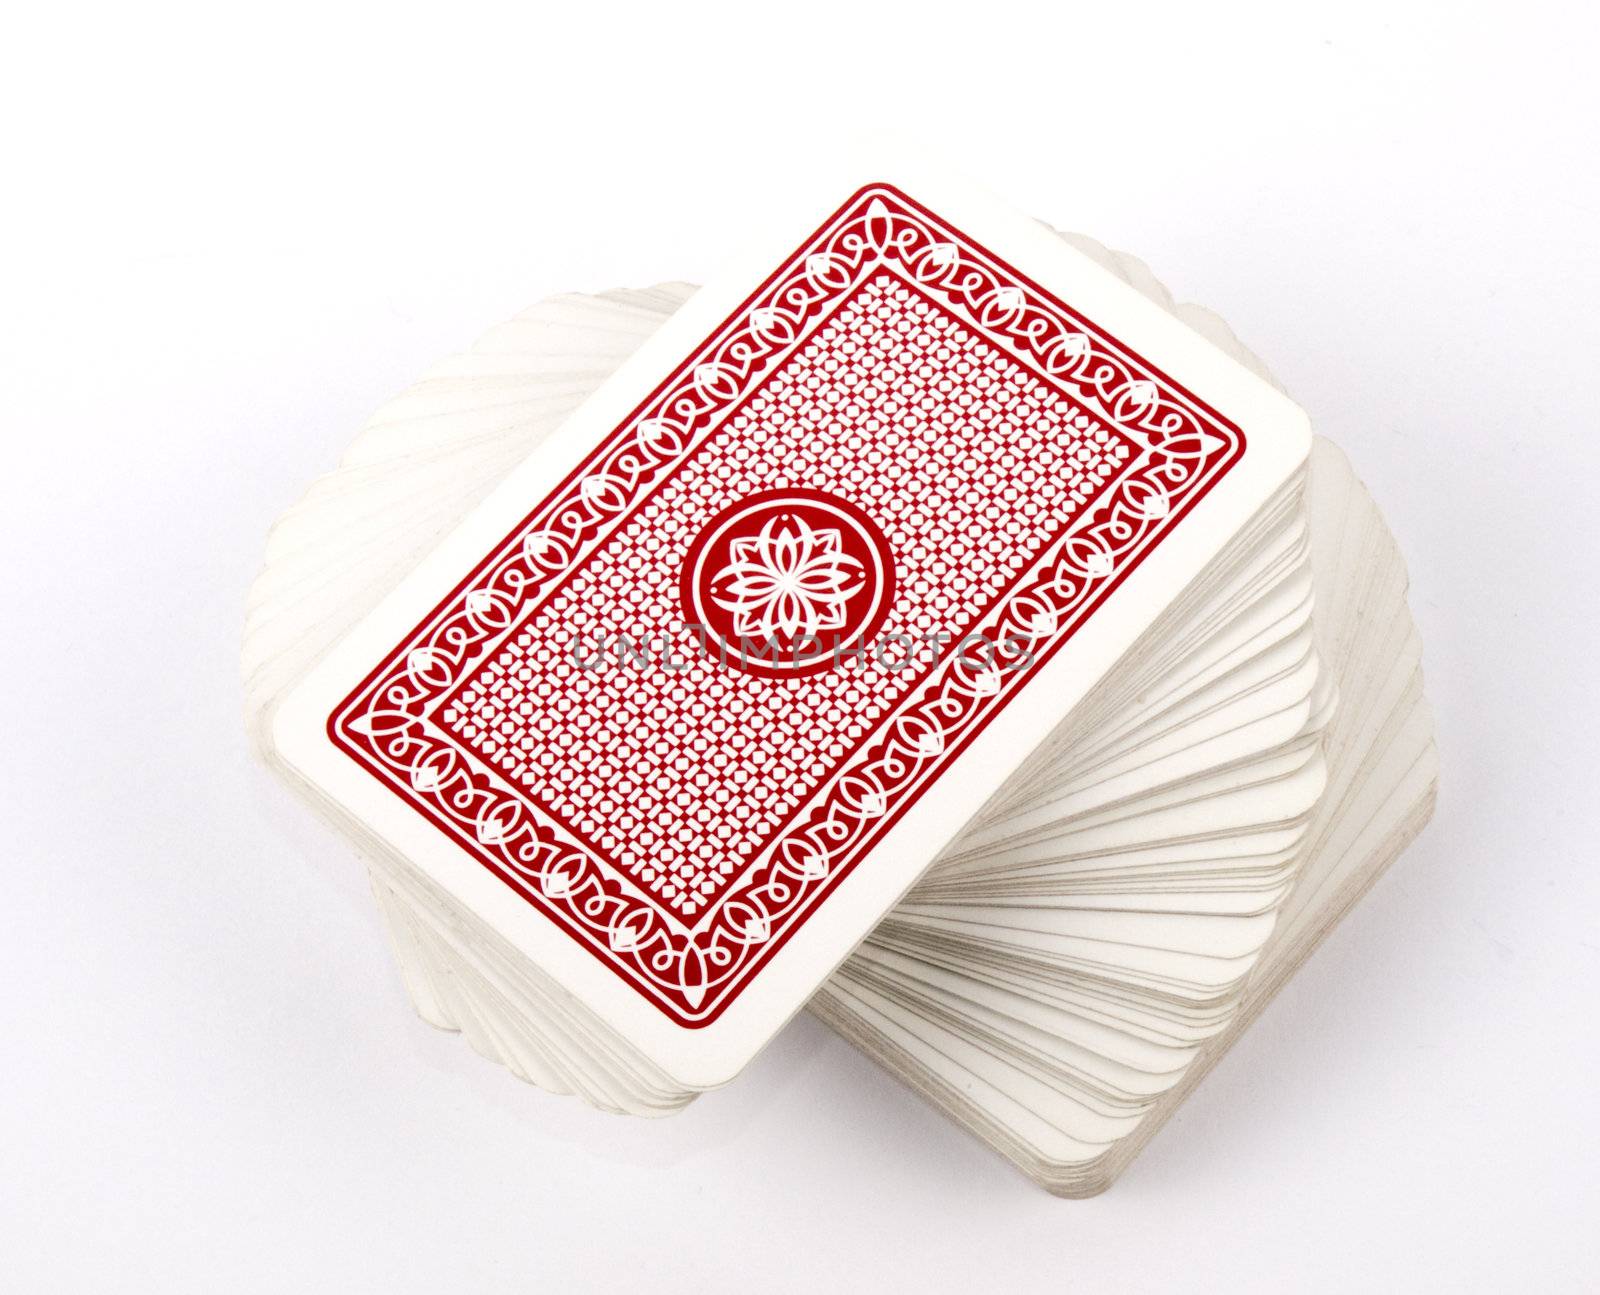 	
	
A pack of cards on white background